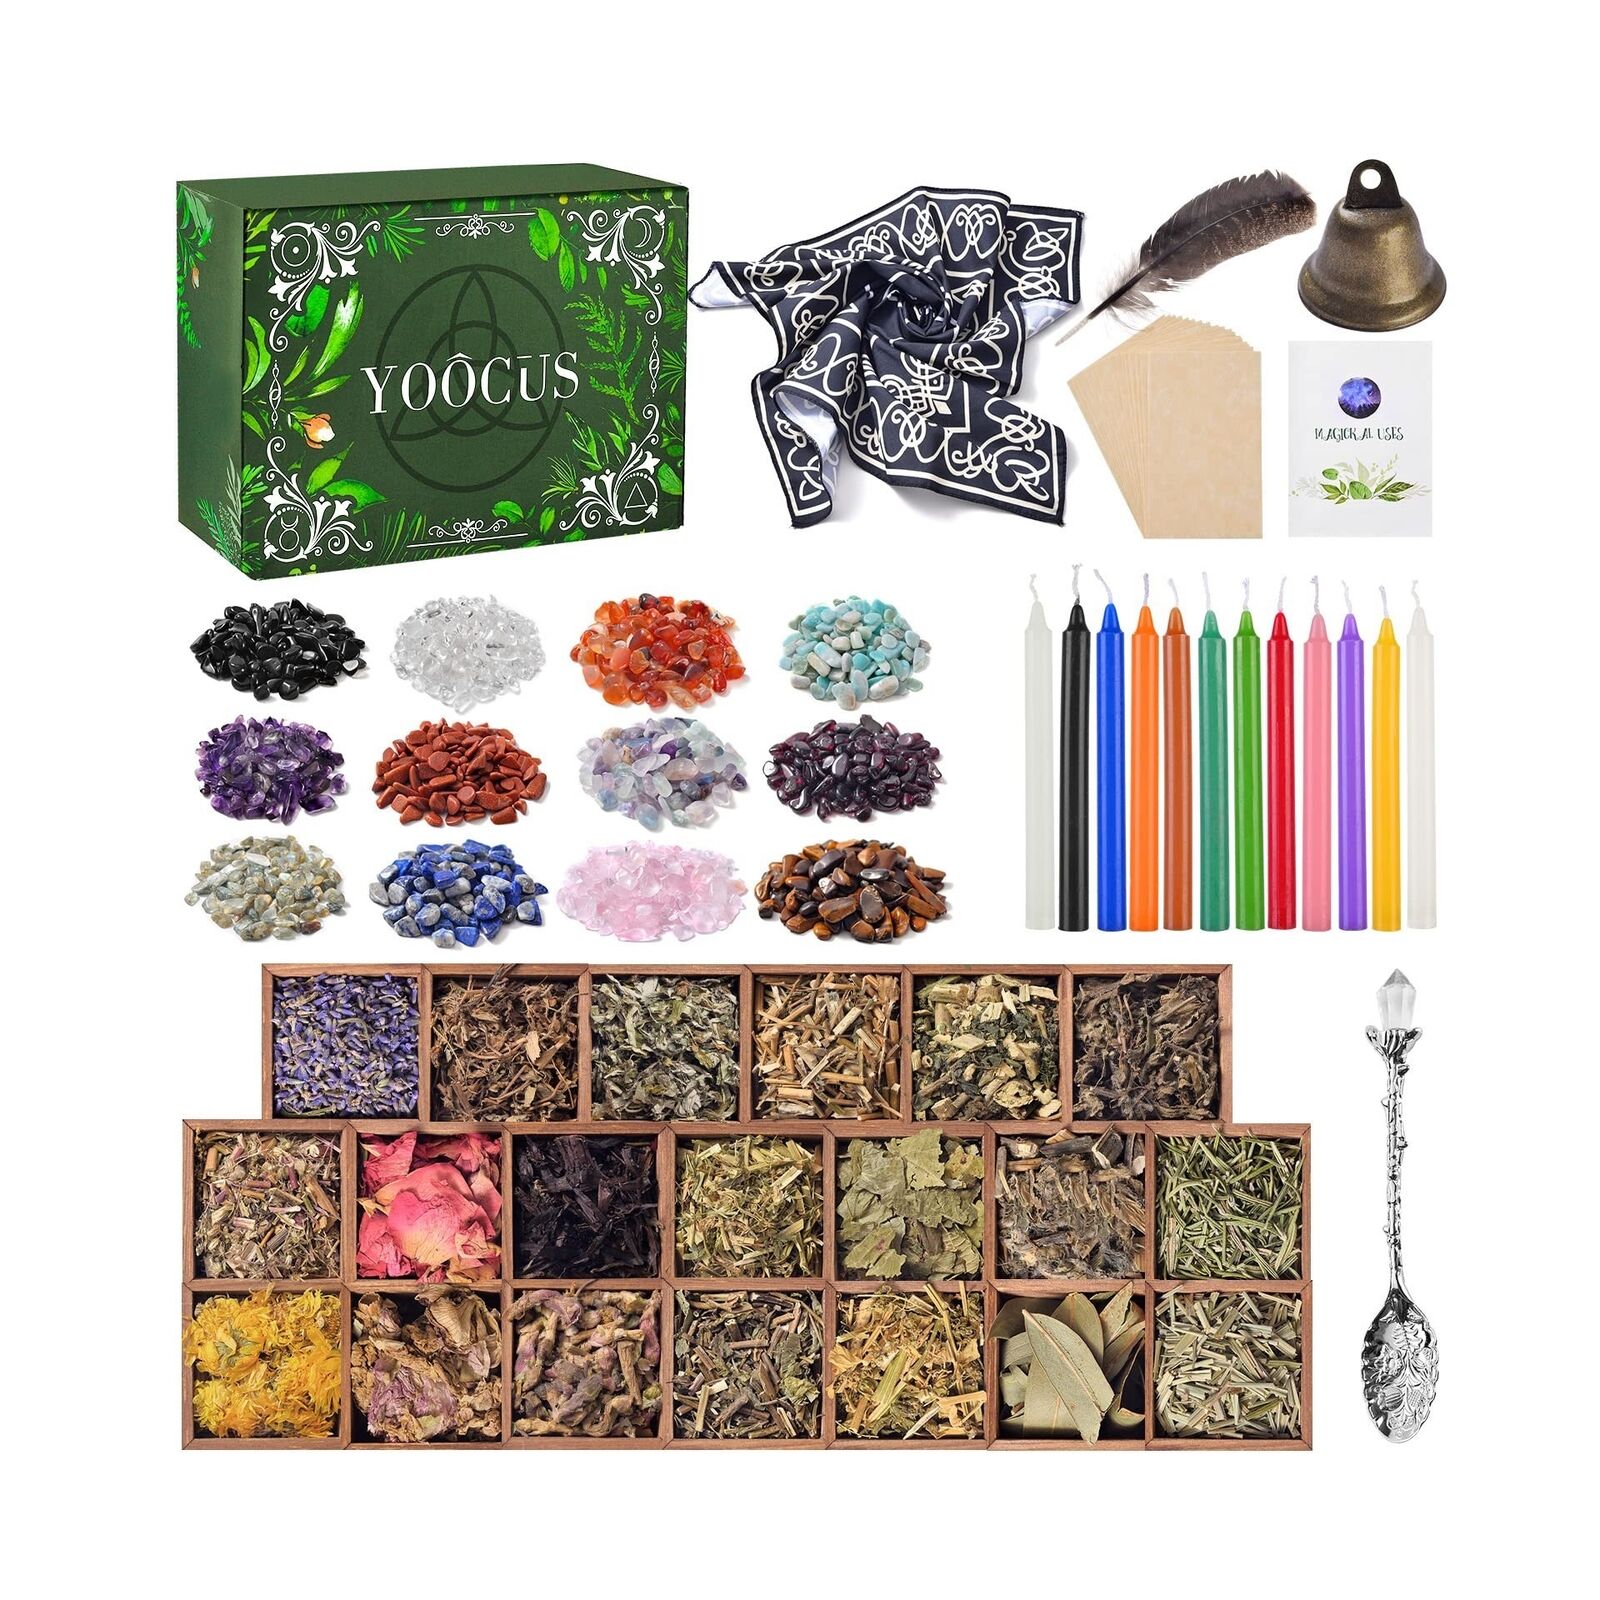 Witchcraft Supplies Kit For Wiccan Spells 69 Packs Of Dried Herbs Healing Cry...